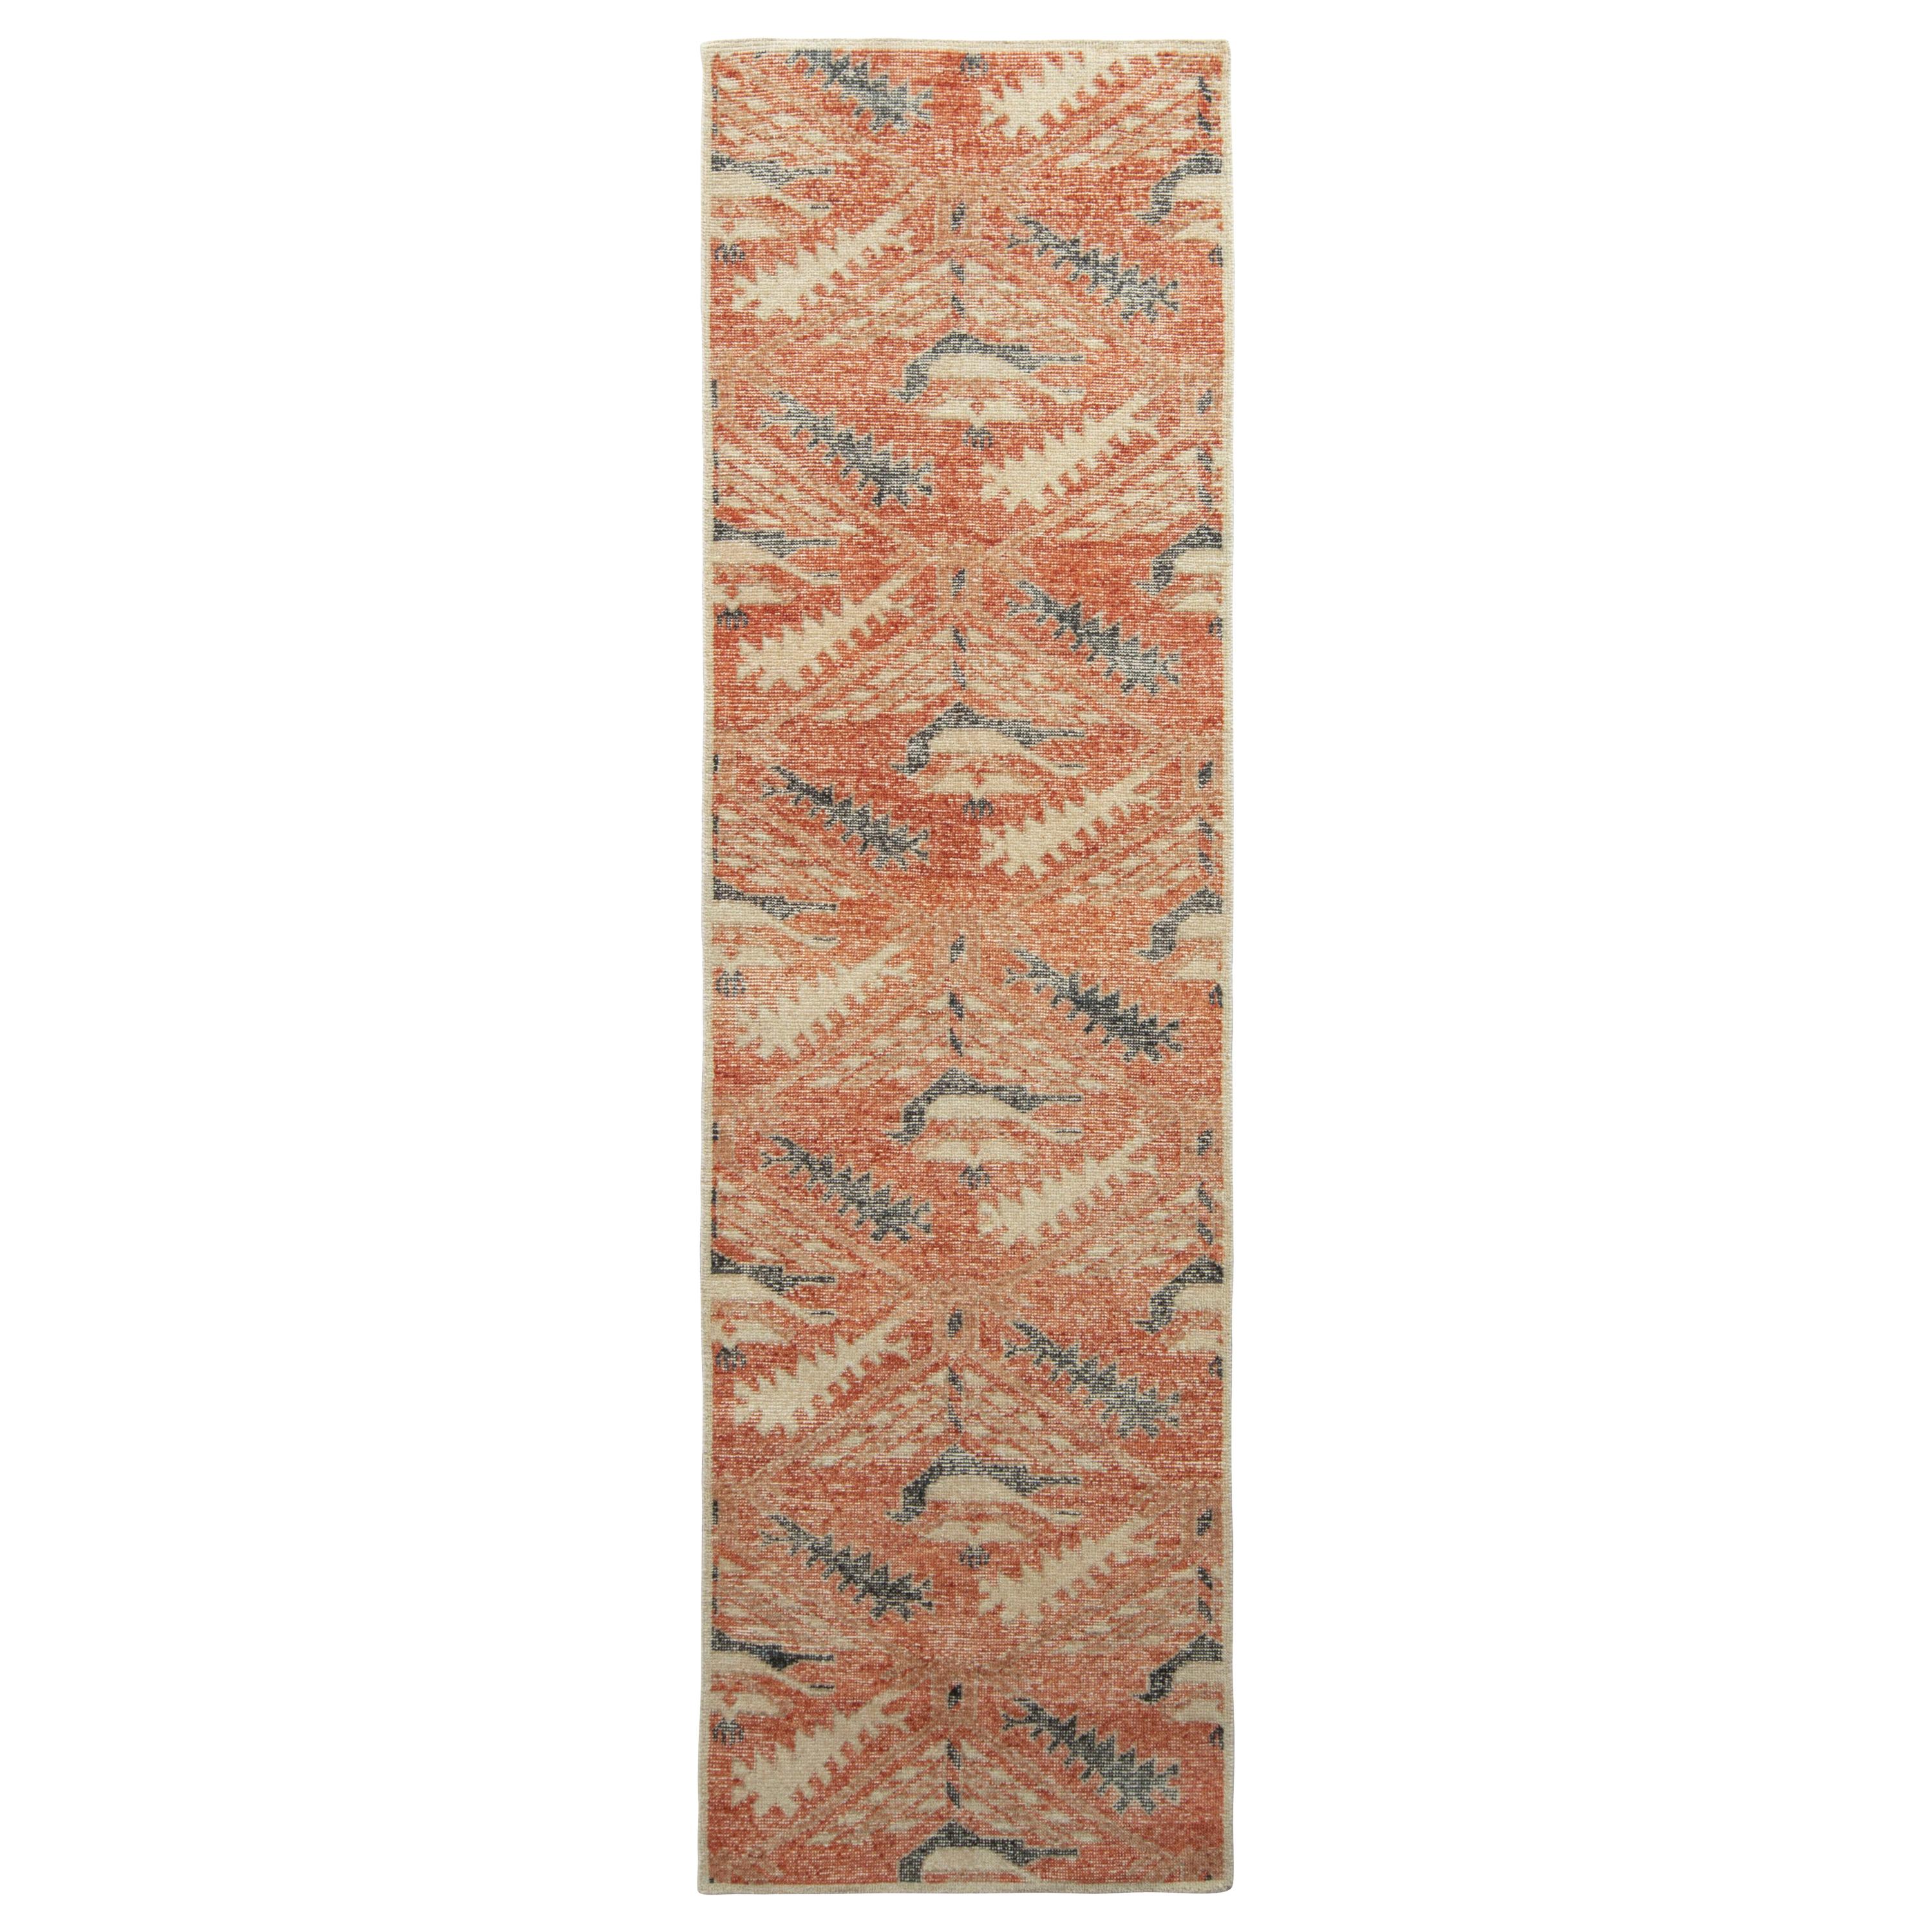 Rug & Kilim’s Distressed Style Runner in Orange-Red, Blue Geometric Pattern For Sale